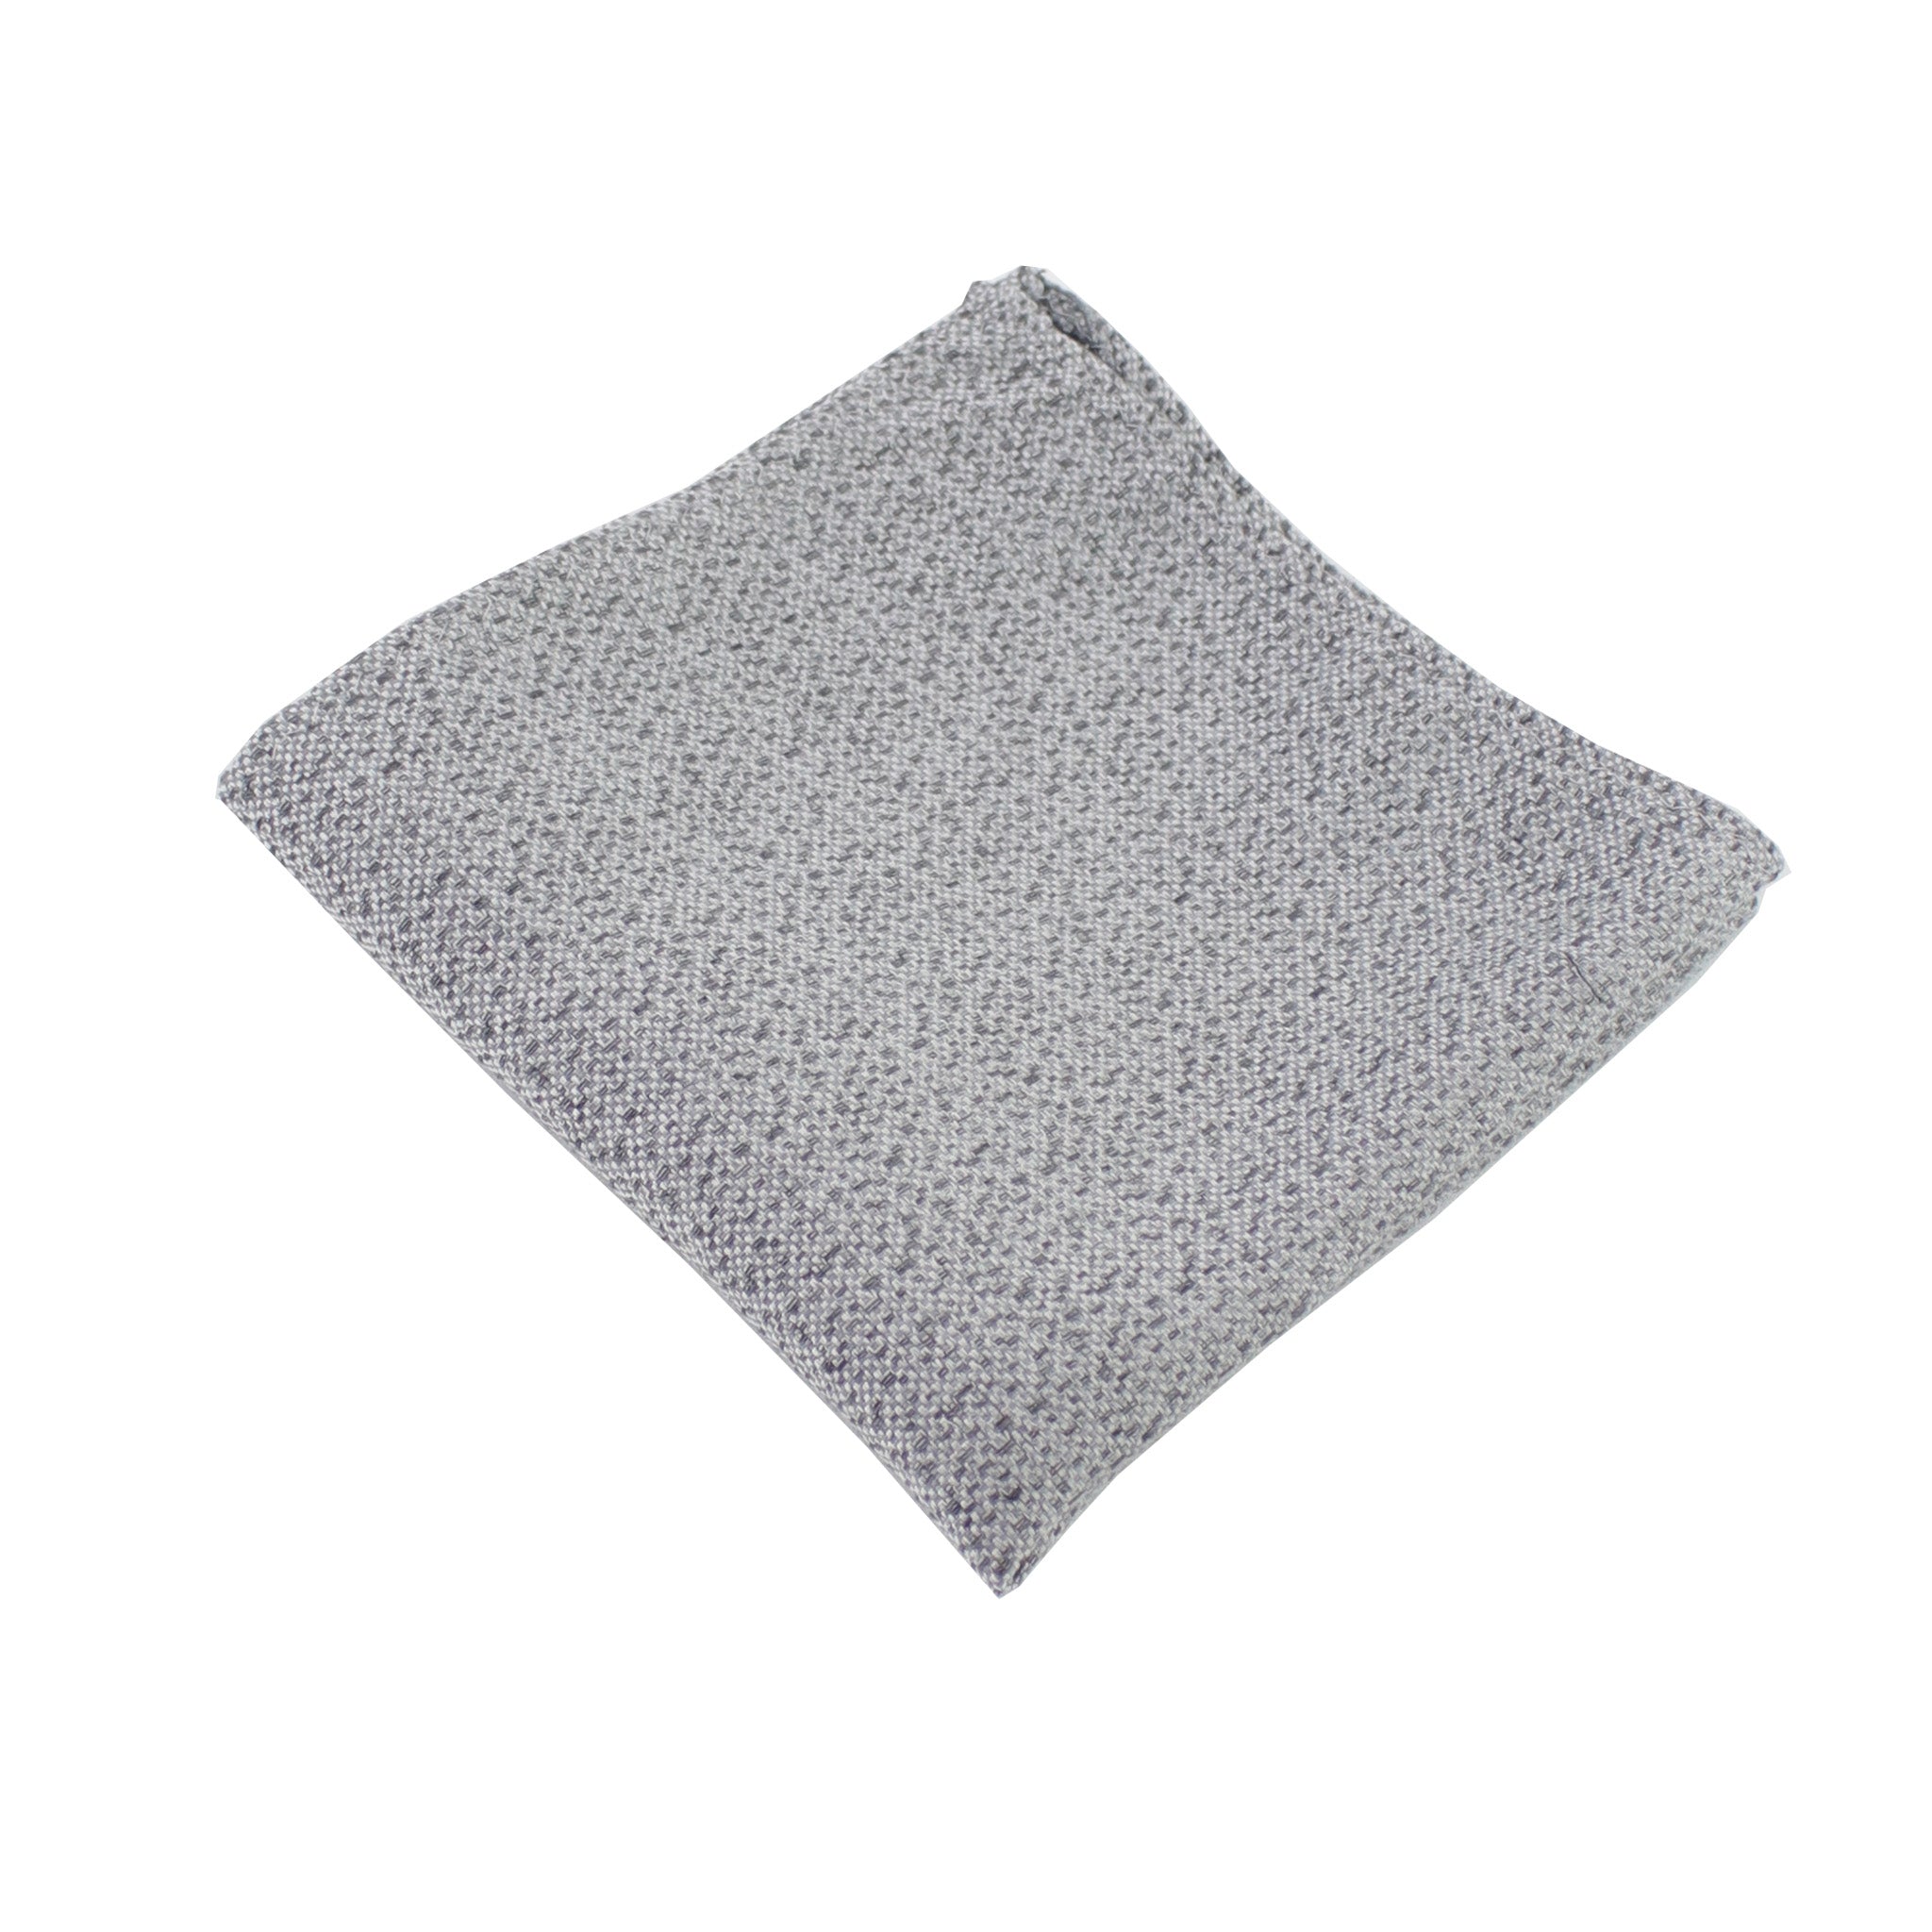 Silver & Charcoal Heather Pocket Square from DIBI